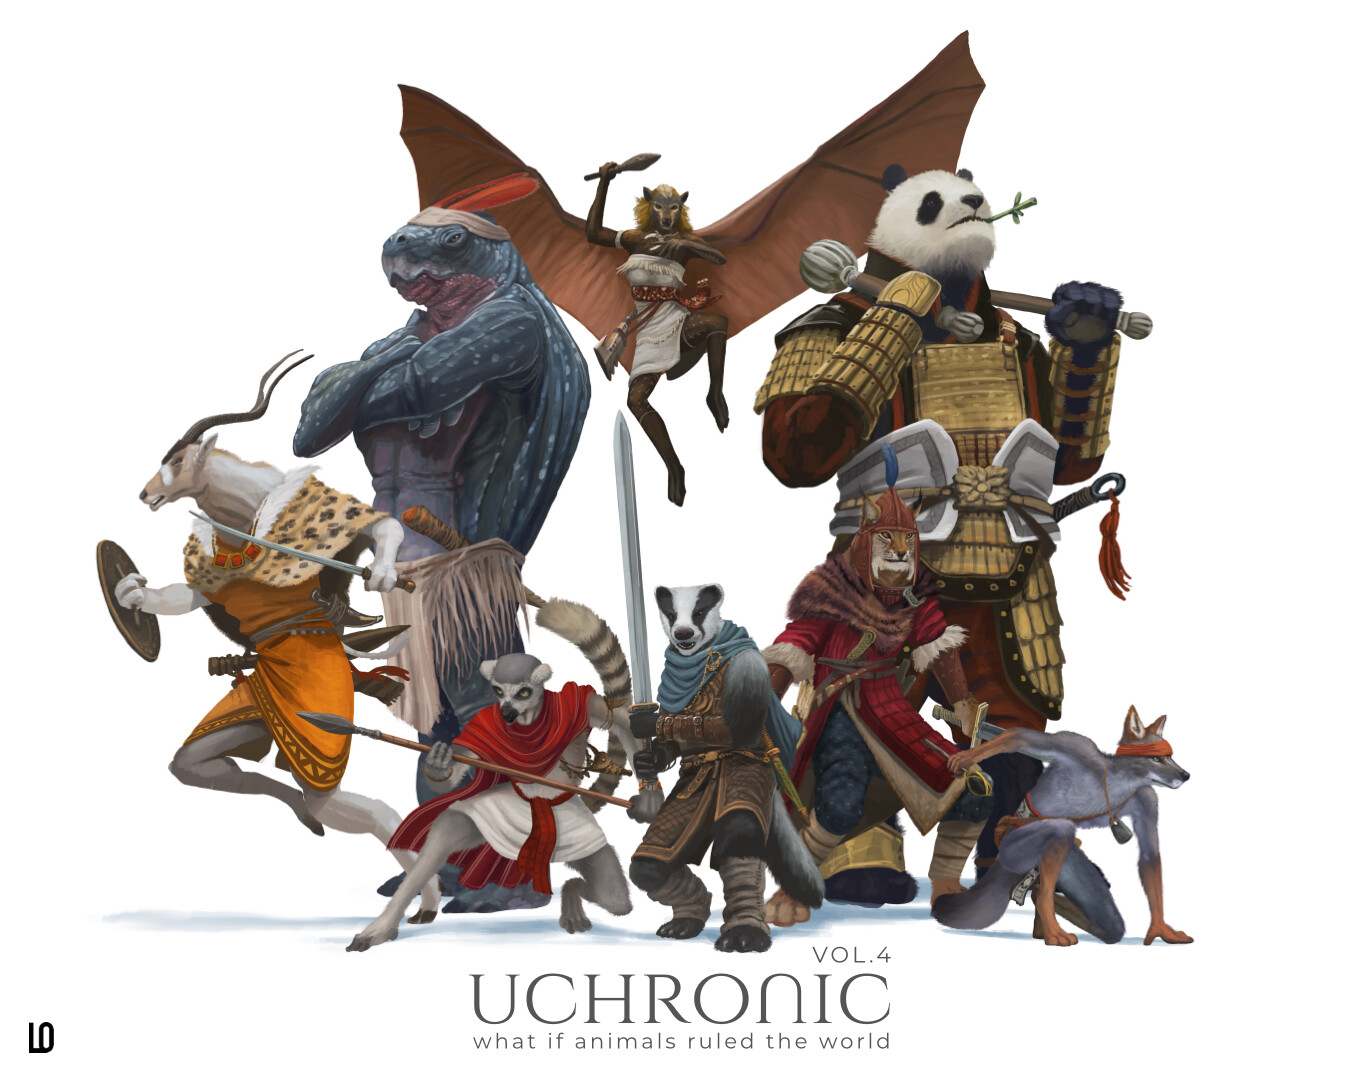 The eight characters from Uchronic Vol.4 reunited!